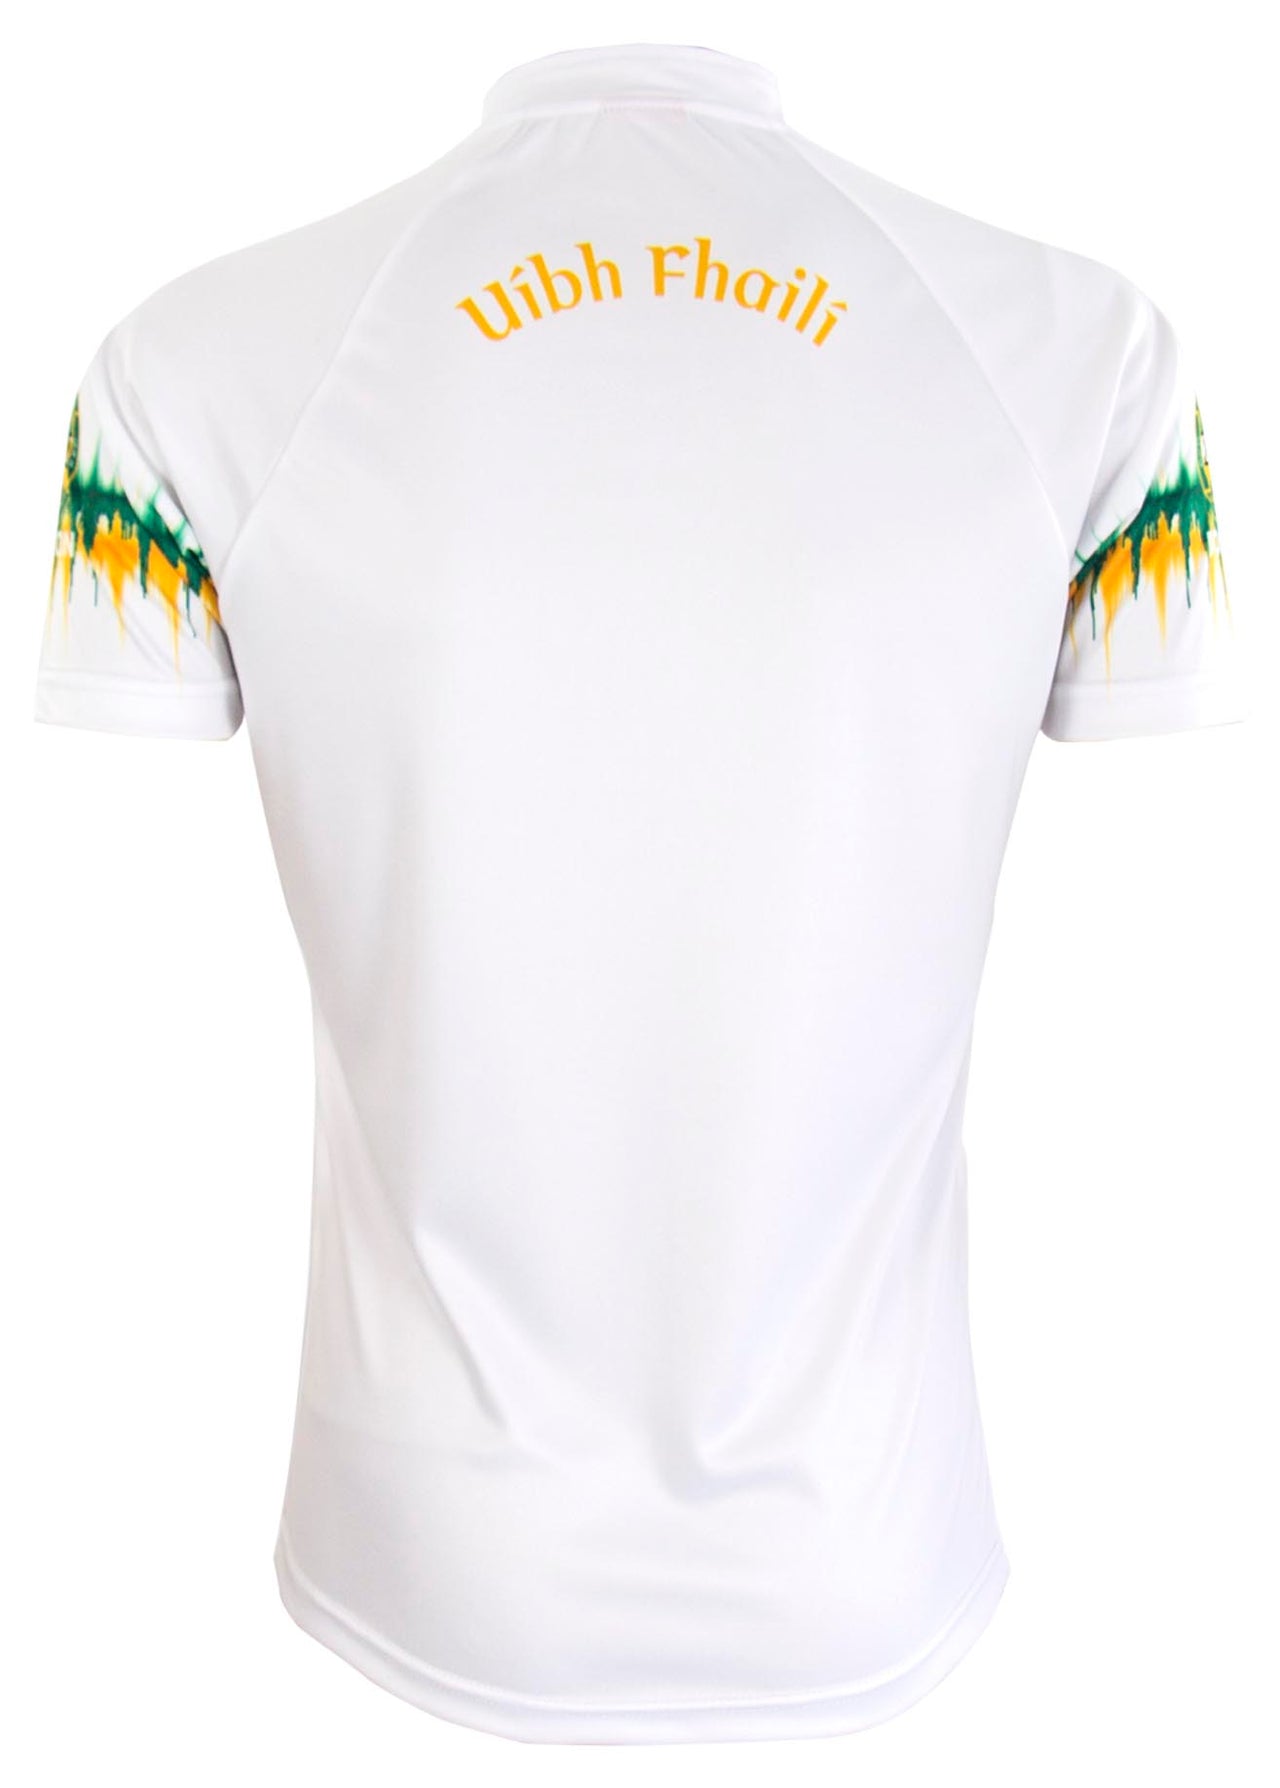 Offaly Boston Away Jersey Player Fit Adult